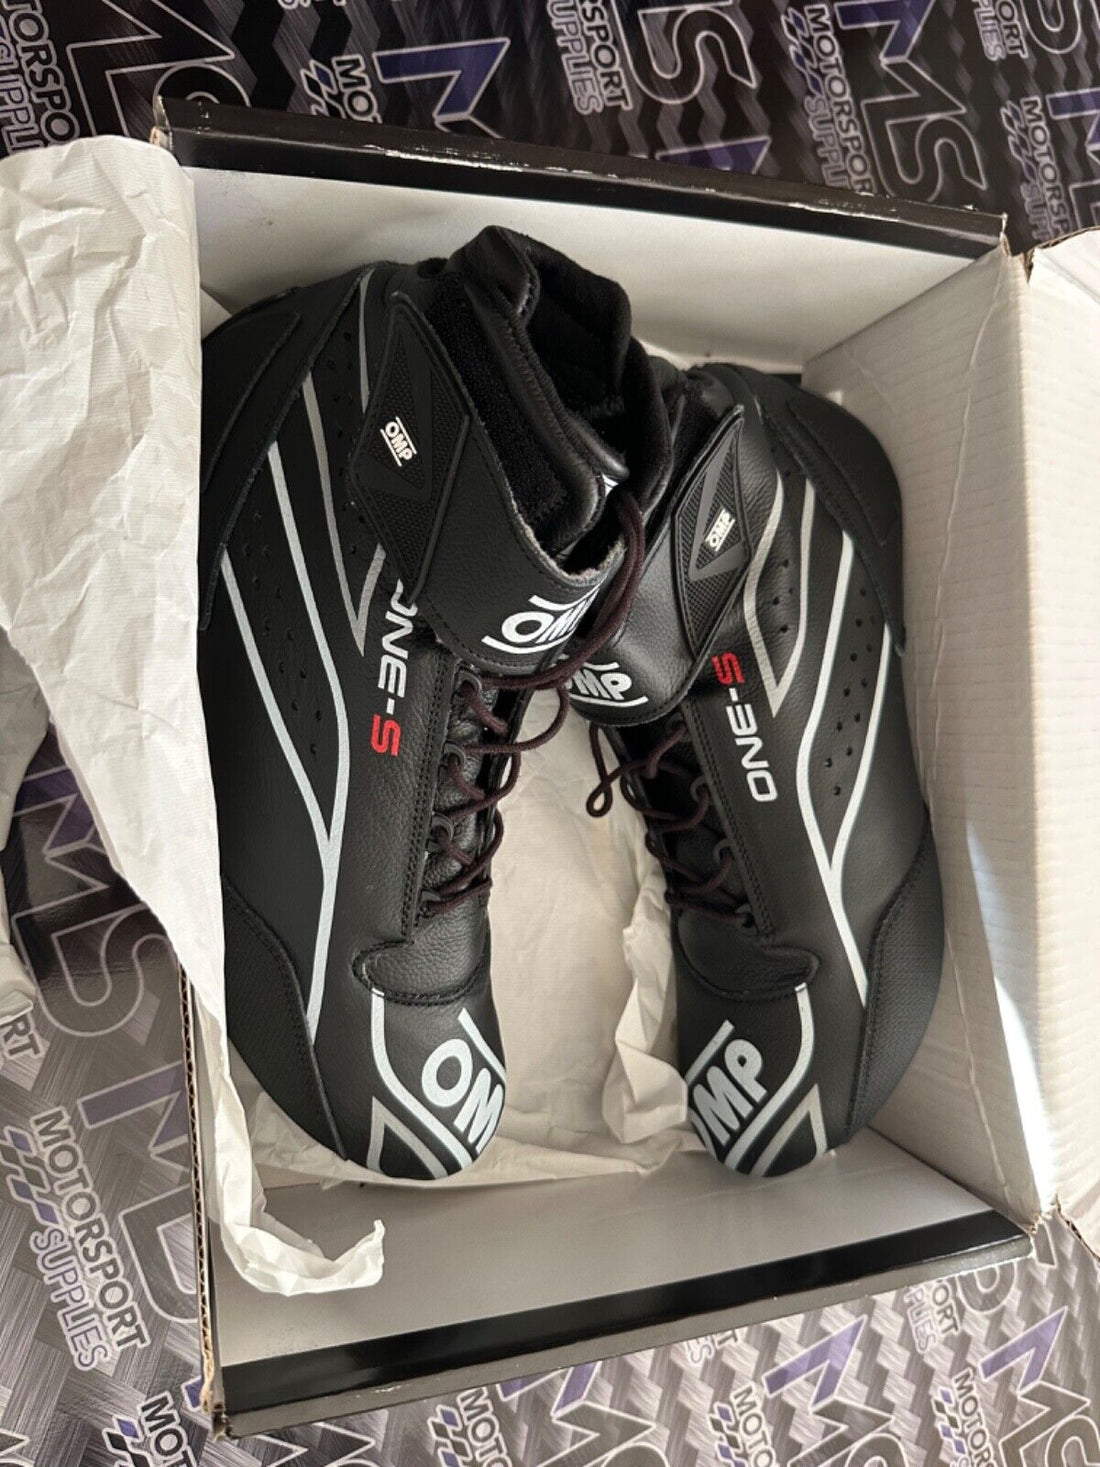 OMP One S Race Boots Size 44 - UK Size 9.5